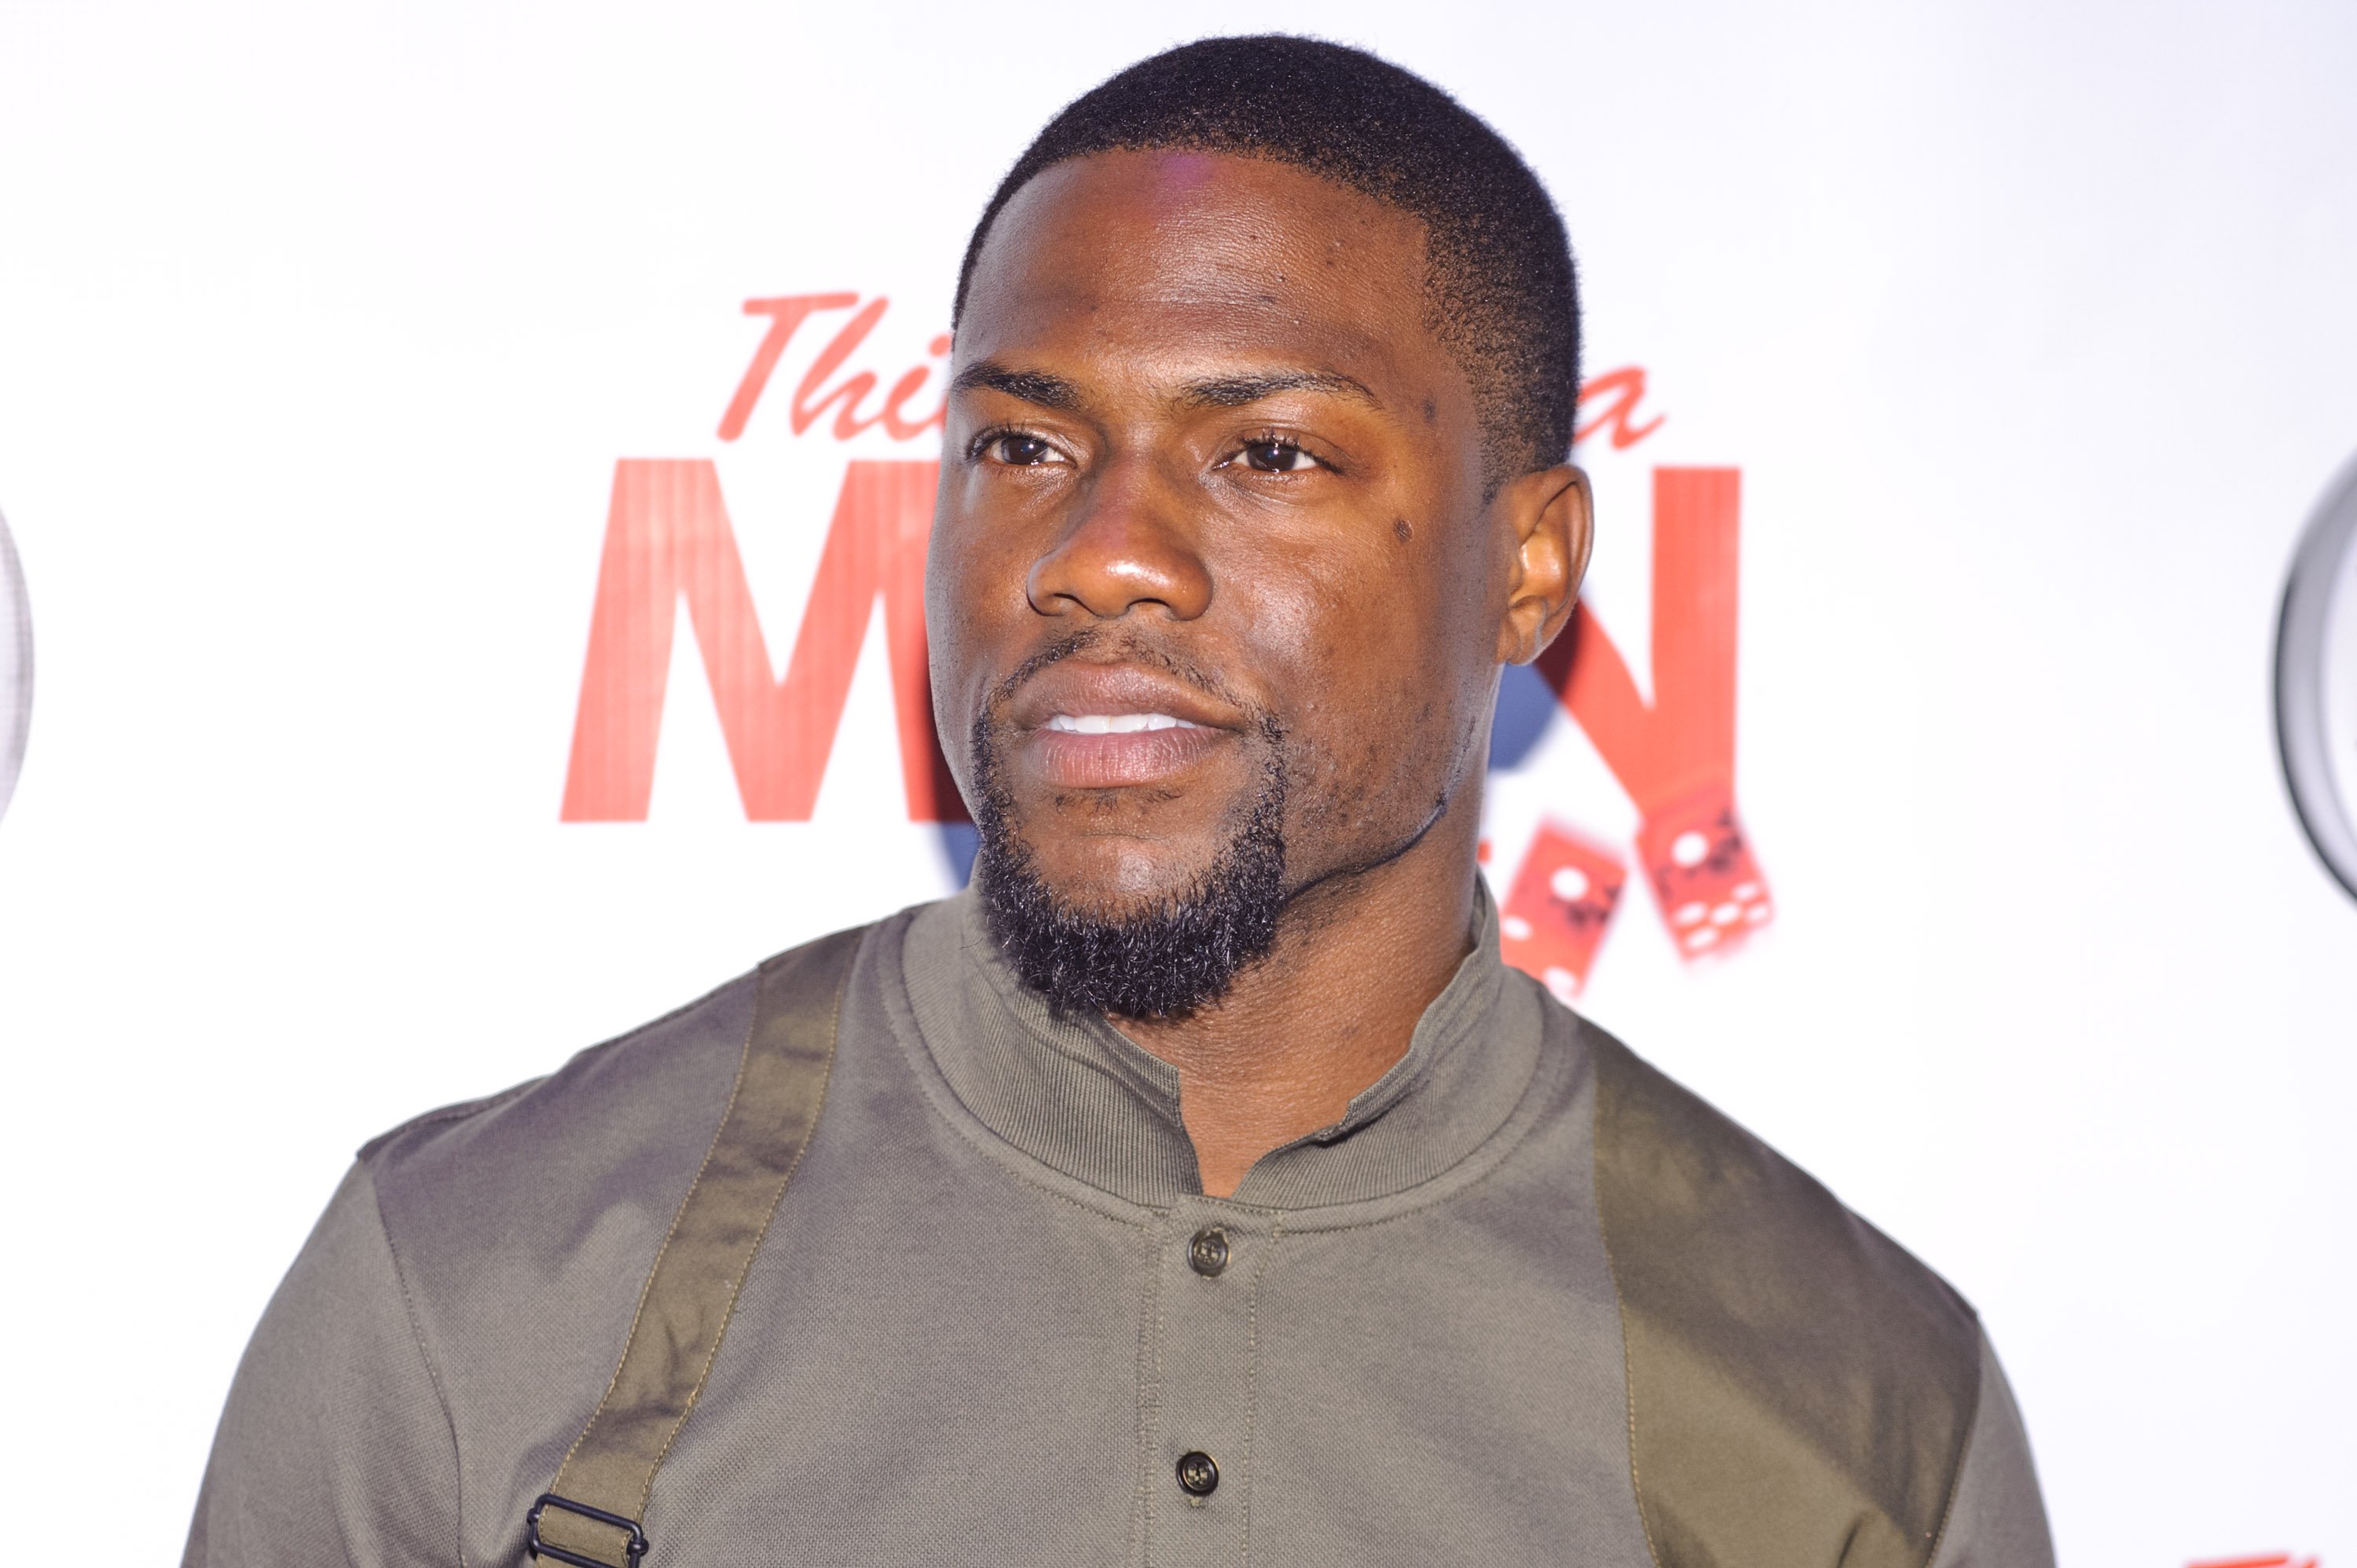 Kevin Hart at a film screening in 2014. | Photo: Getty Images